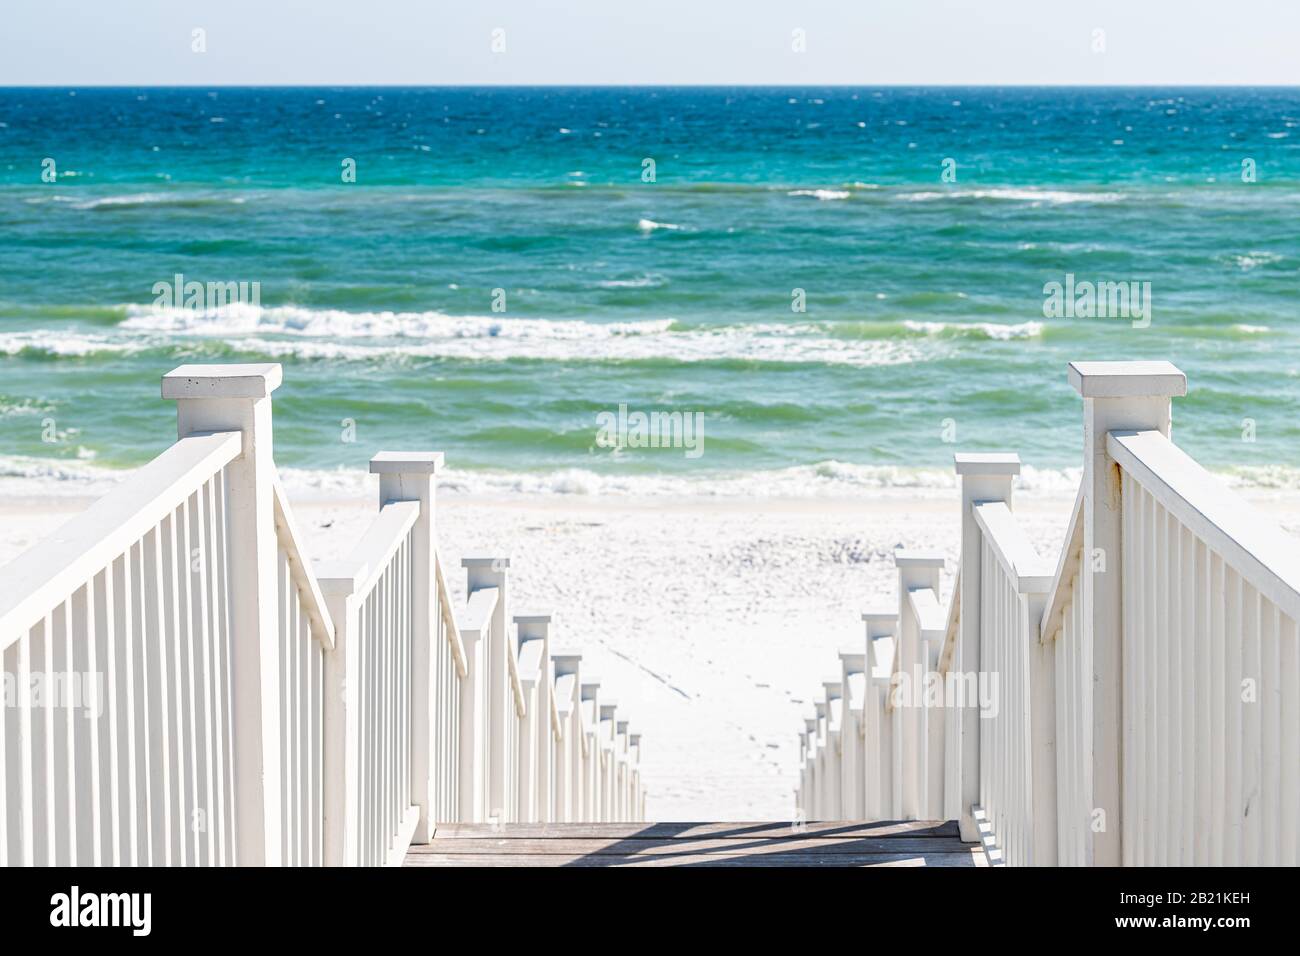 Seaside, Florida railing wooden stairway walkway steps architecture by beach ocean background view down during sunny day Stock Photo